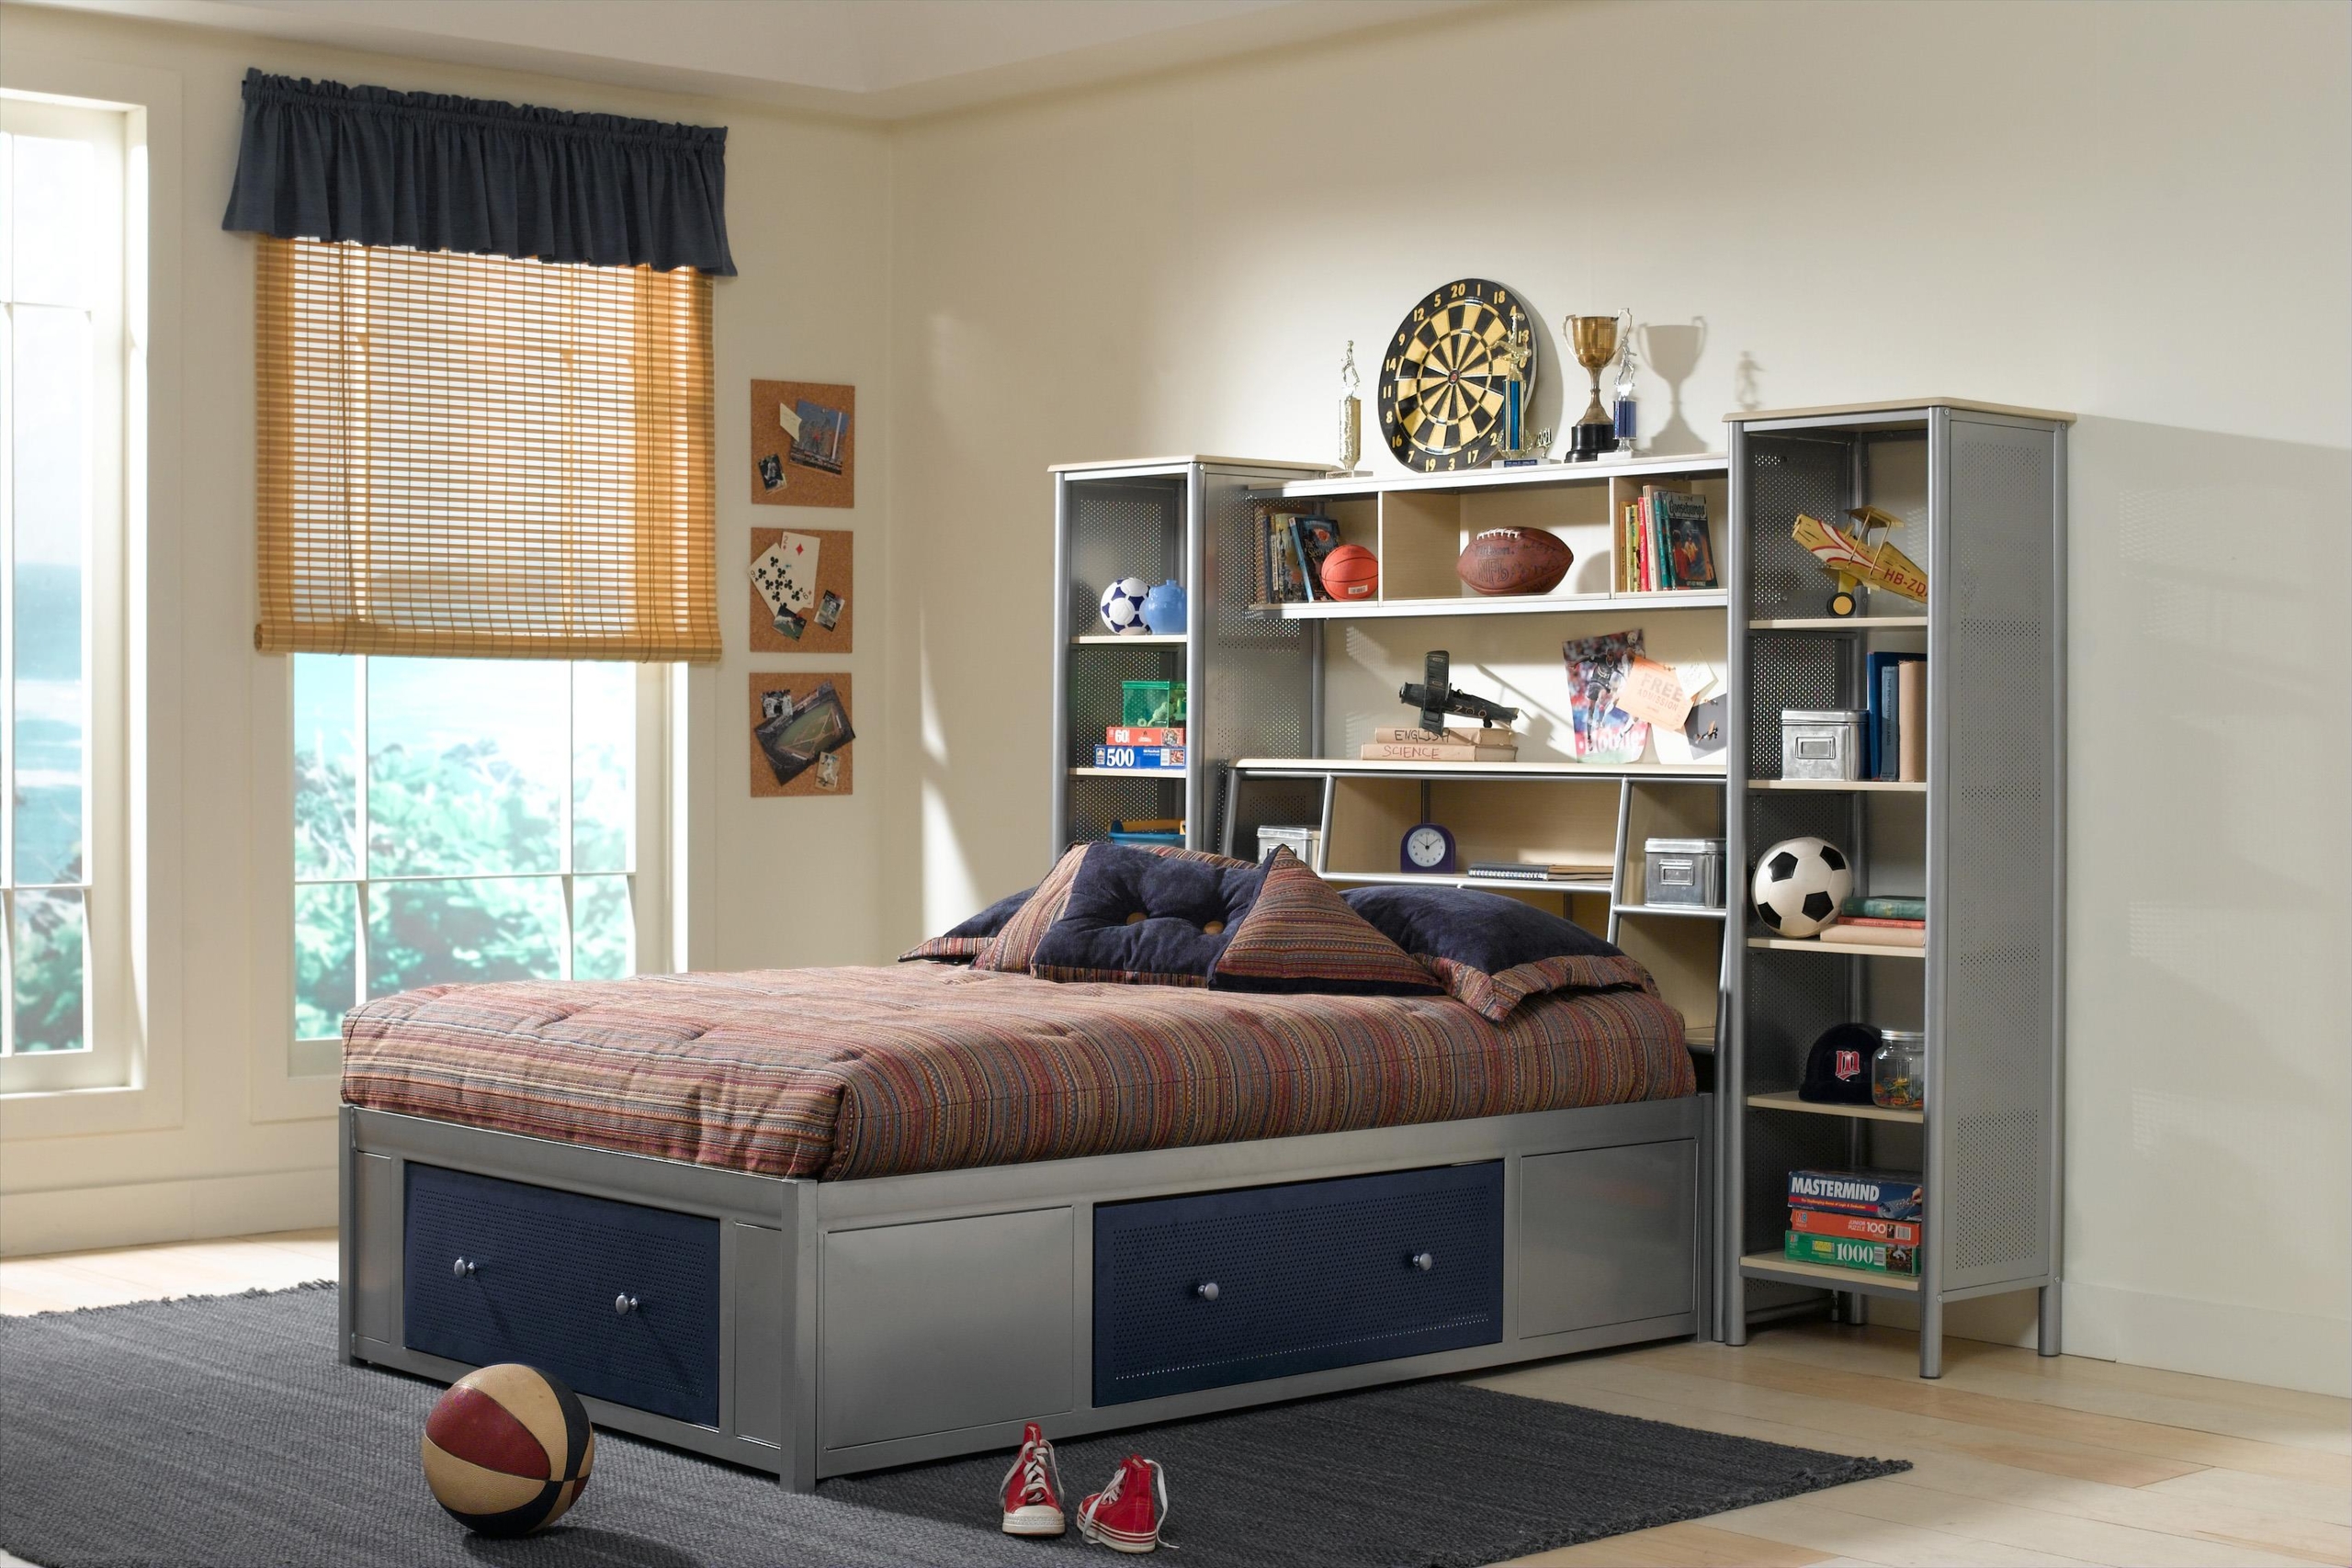 Bookcase headboards for king size beds